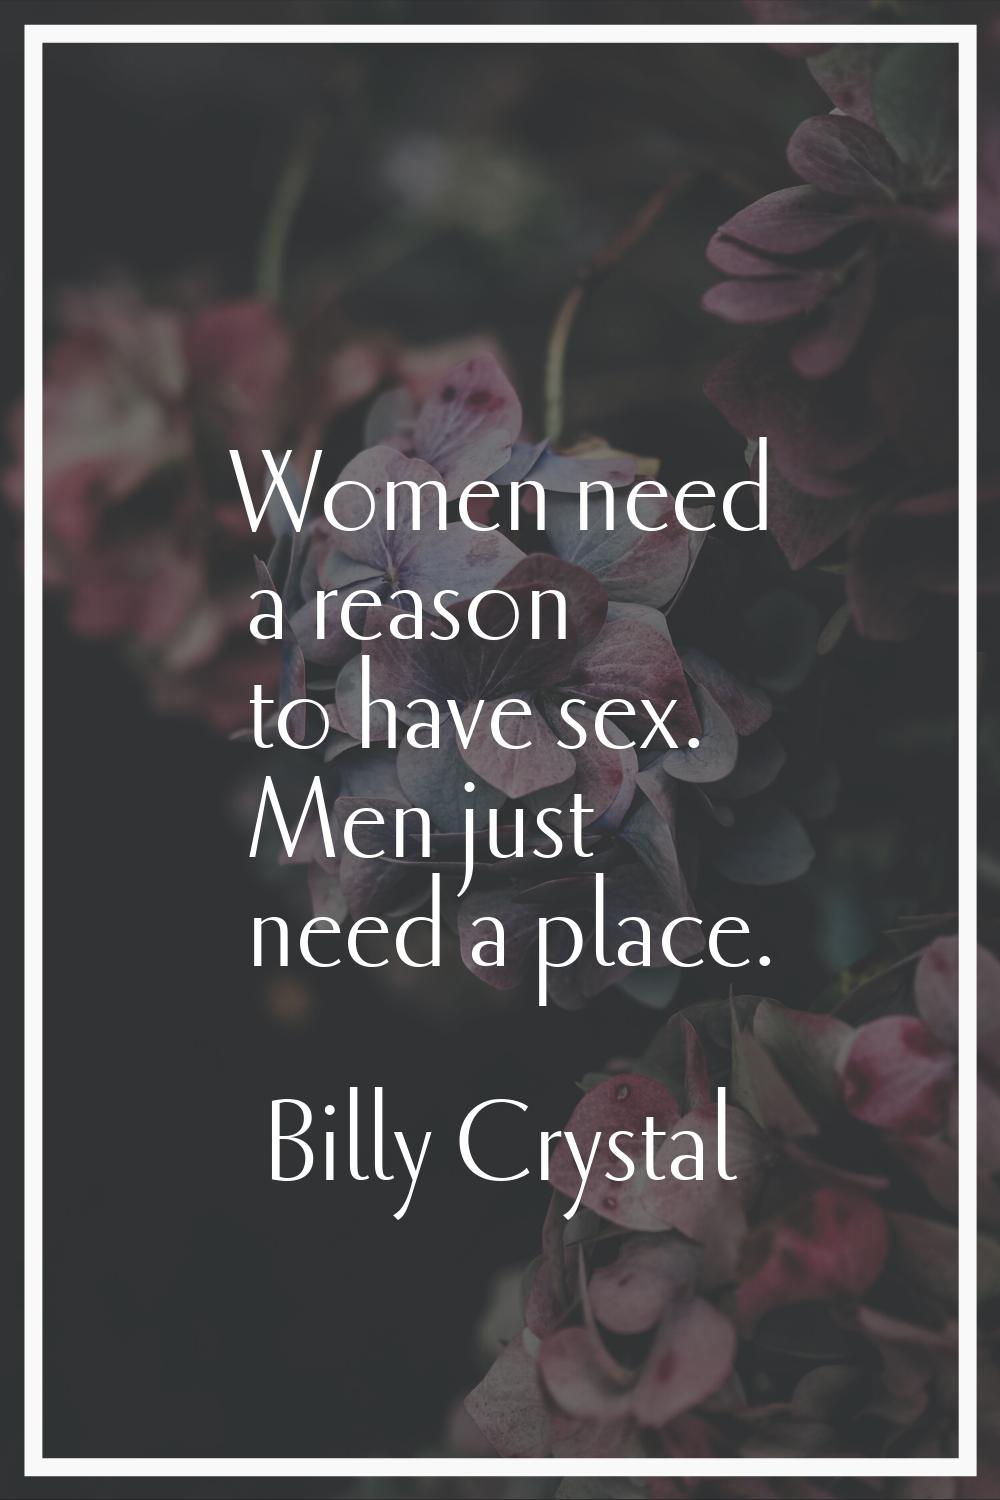 Women need a reason to have sex. Men just need a place.